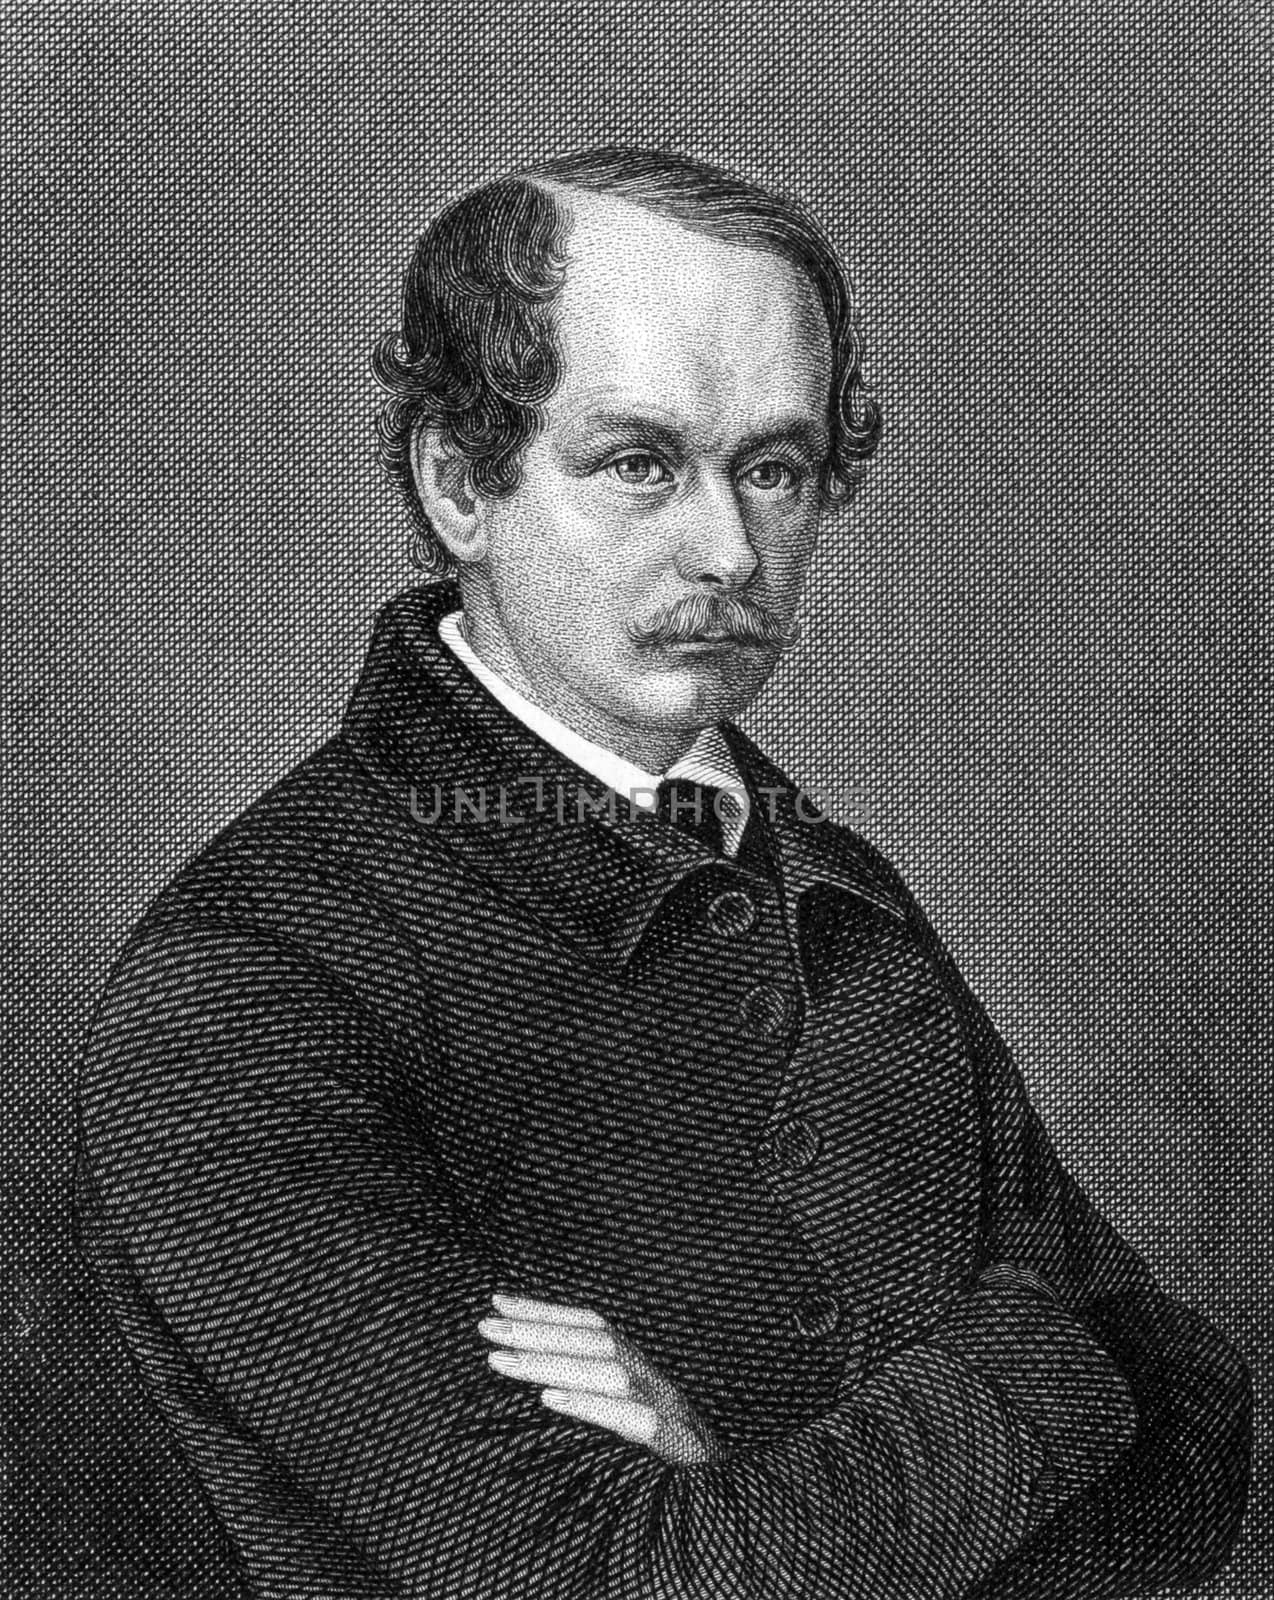 Matthias Jakob Schleiden (1804-1881) on engraving from 1859. German botanist and co-founder of the cell theory. Engraved by unknown artist and published in Meyers Konversations-Lexikon, Germany,1859.